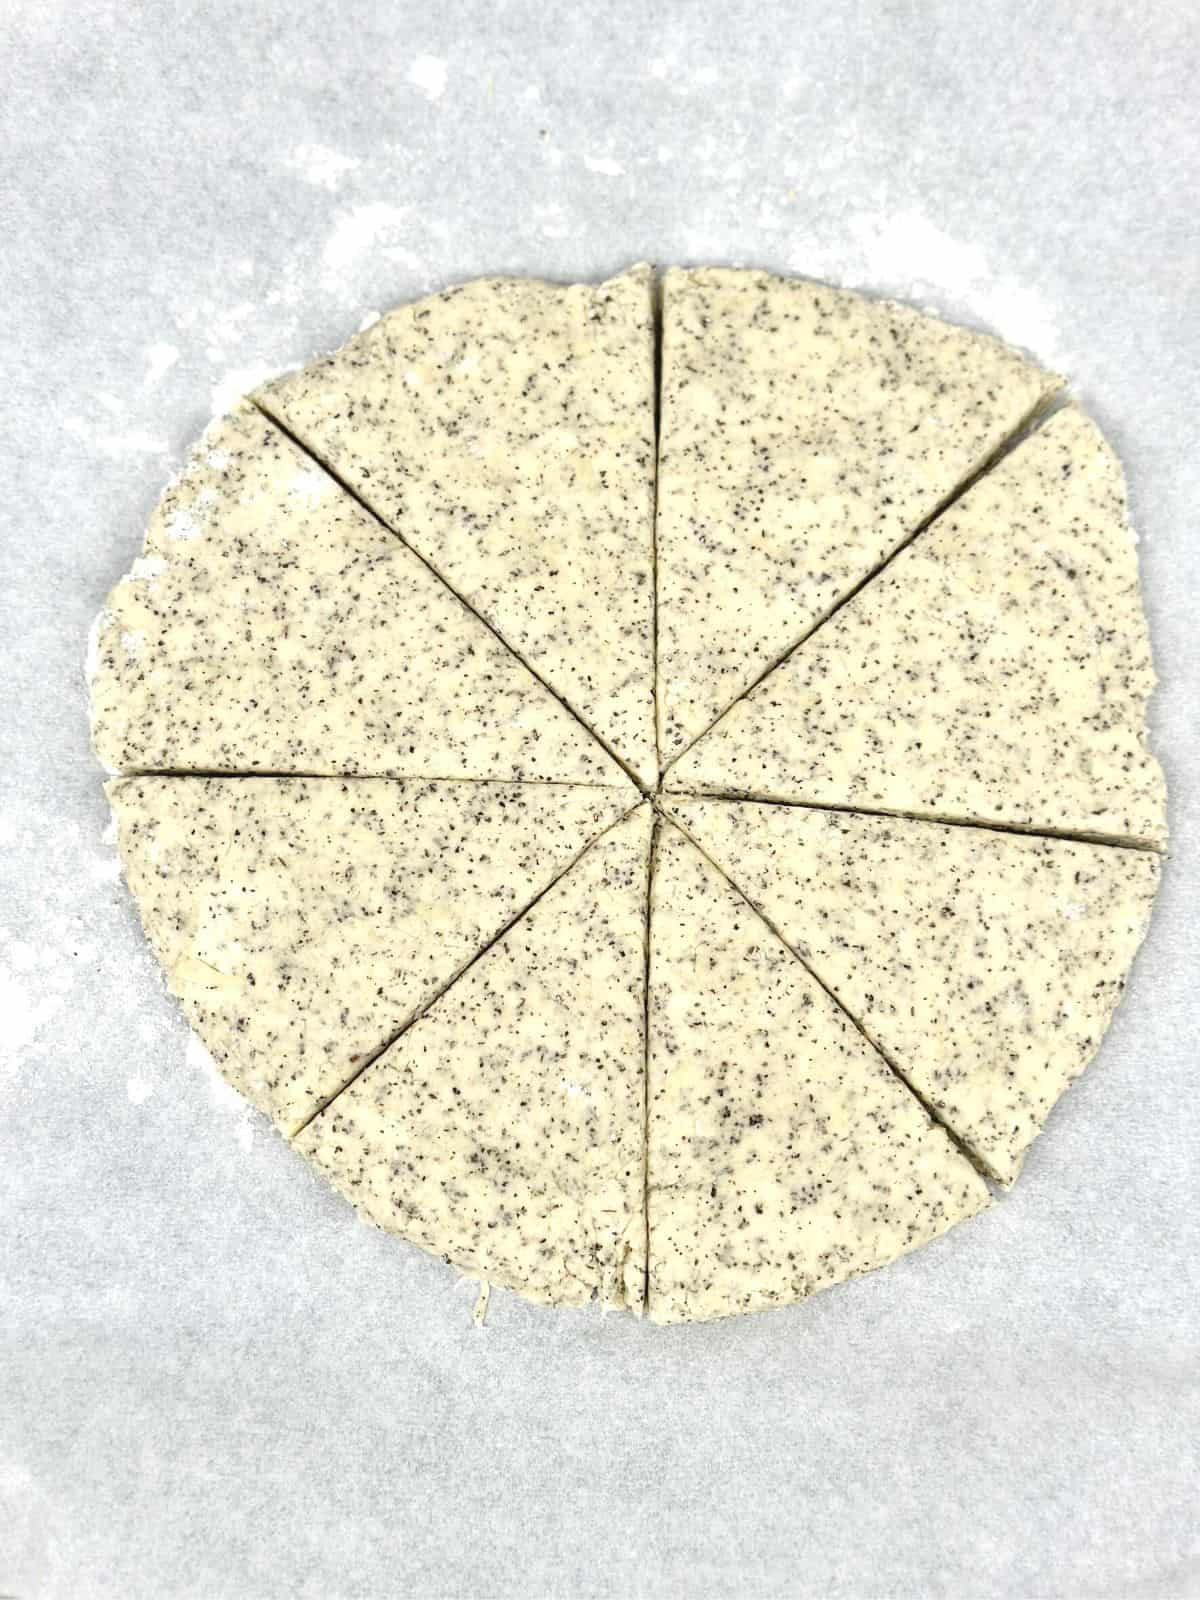 A disk of scone dough on a floured board.